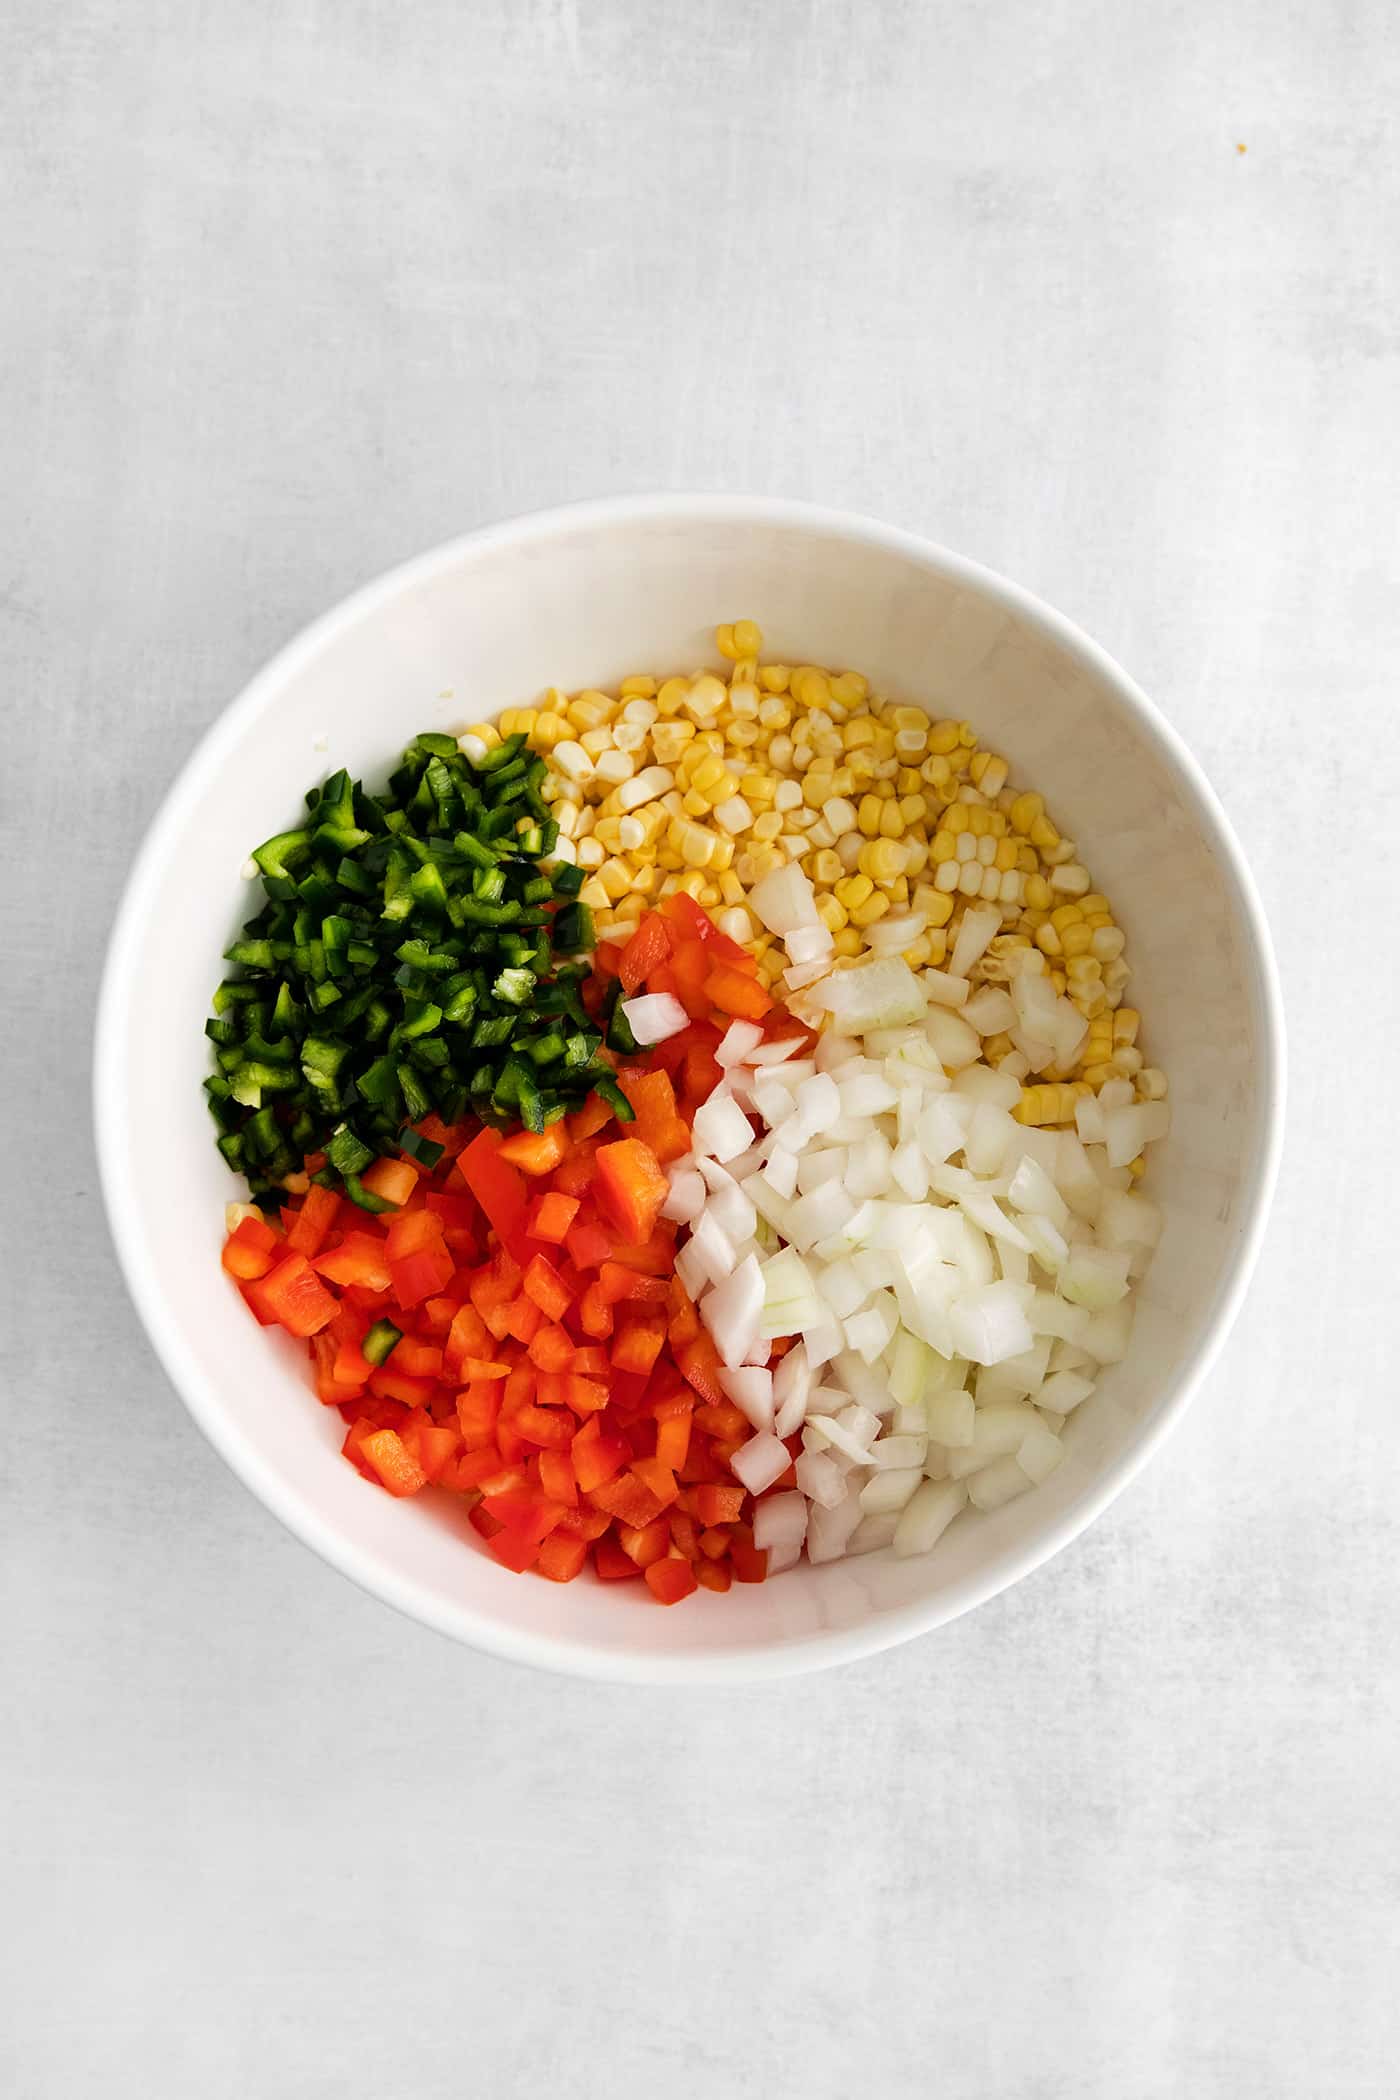 Corn, red peppers, poblano peppers, and onion in a bowl